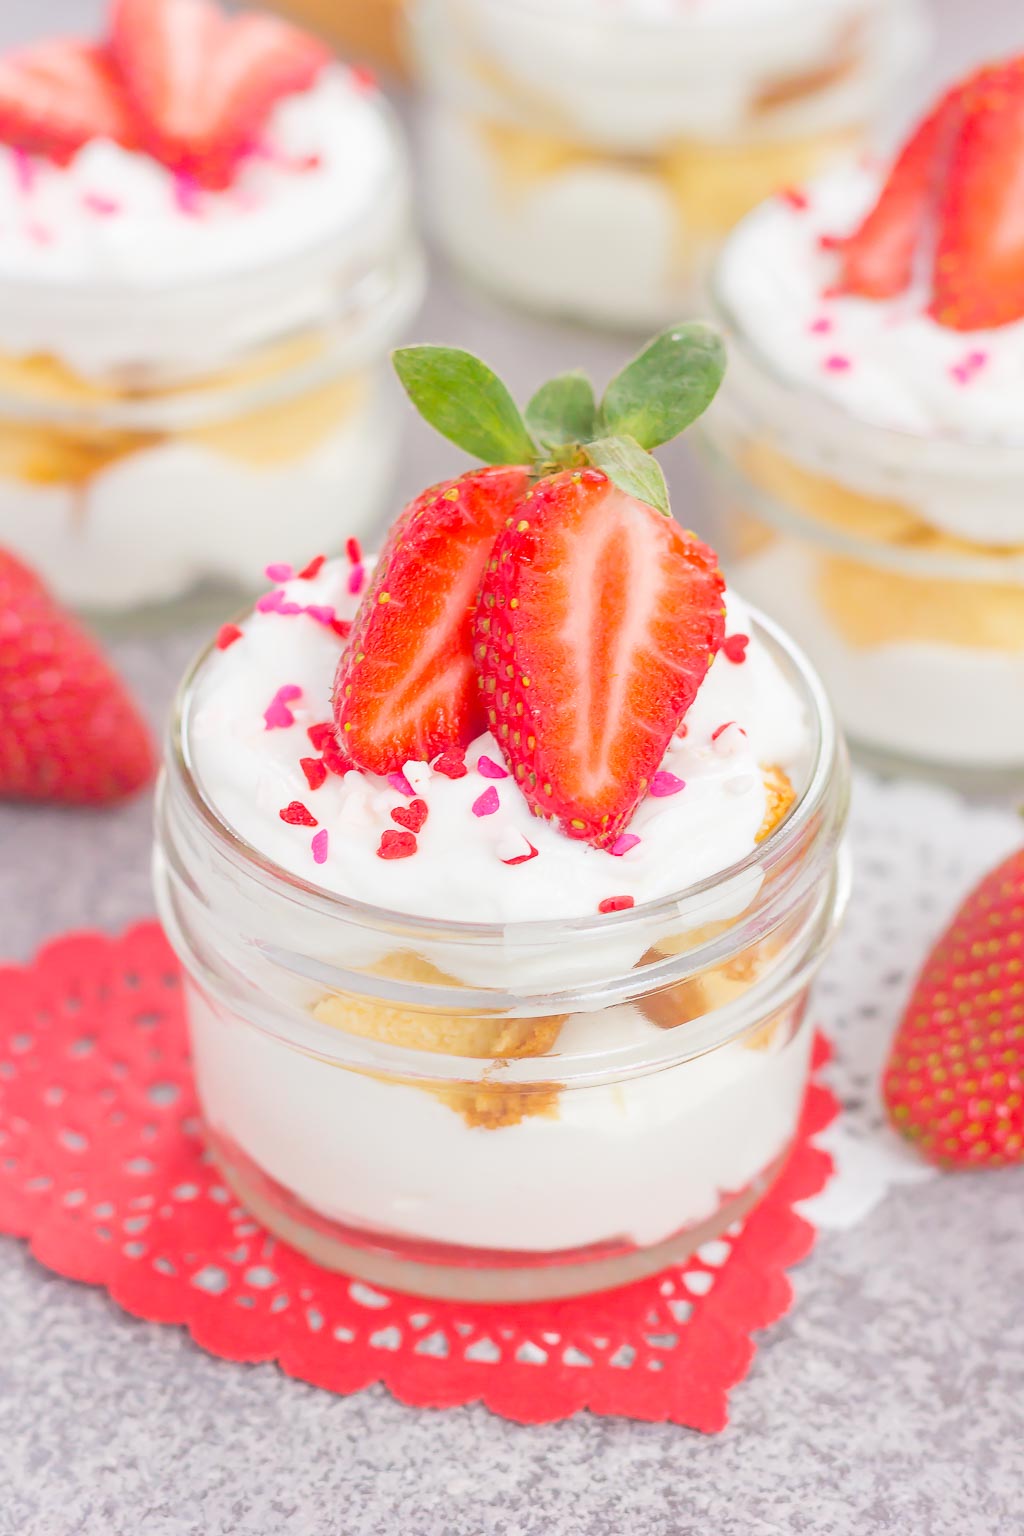 These Strawberry White Chocolate Pound Cake Trifles make a simple yet decadent dessert that's perfect for just about any occasion. Filled with pound cake chunks, white chocolate mousse and fresh strawberries, this easy, no-bake treat is ready in no time!